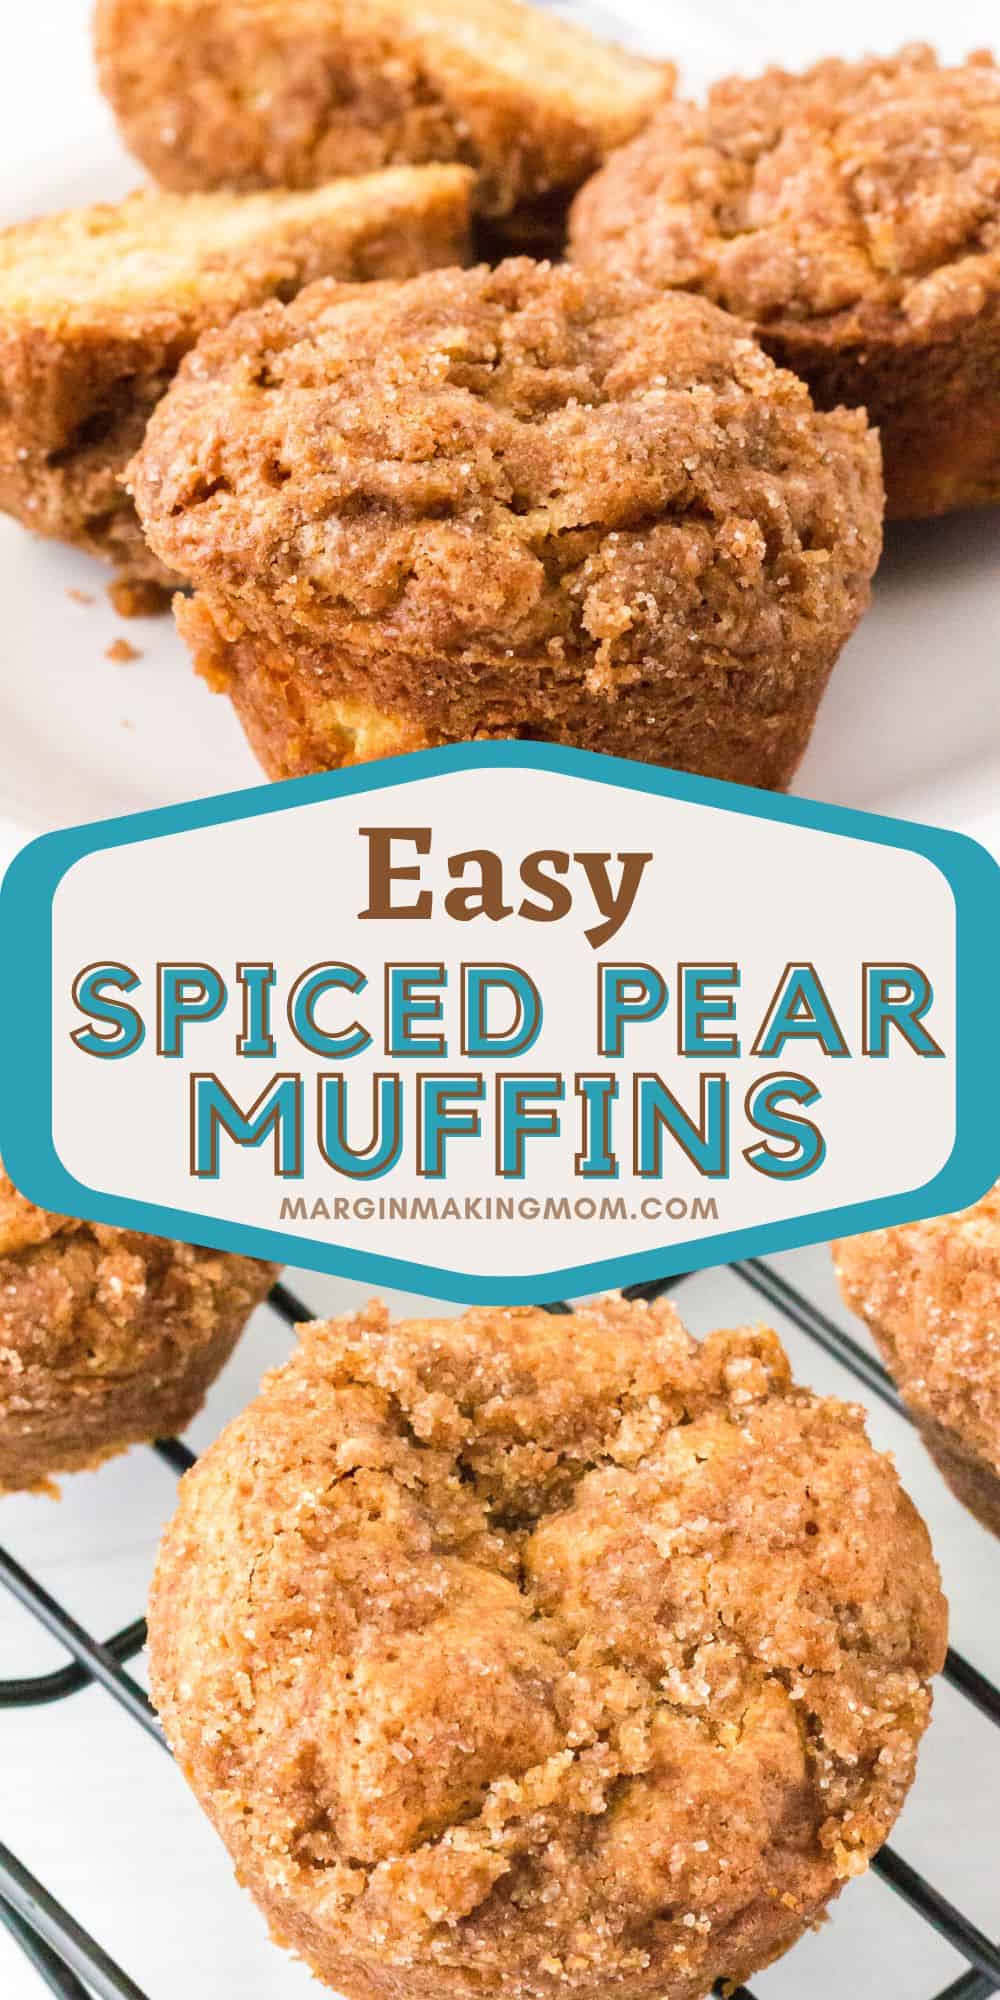 two photos; one shows pear muffins on a wire cooling rack; the other shows a close-up view of a pear muffin topped with streusel.